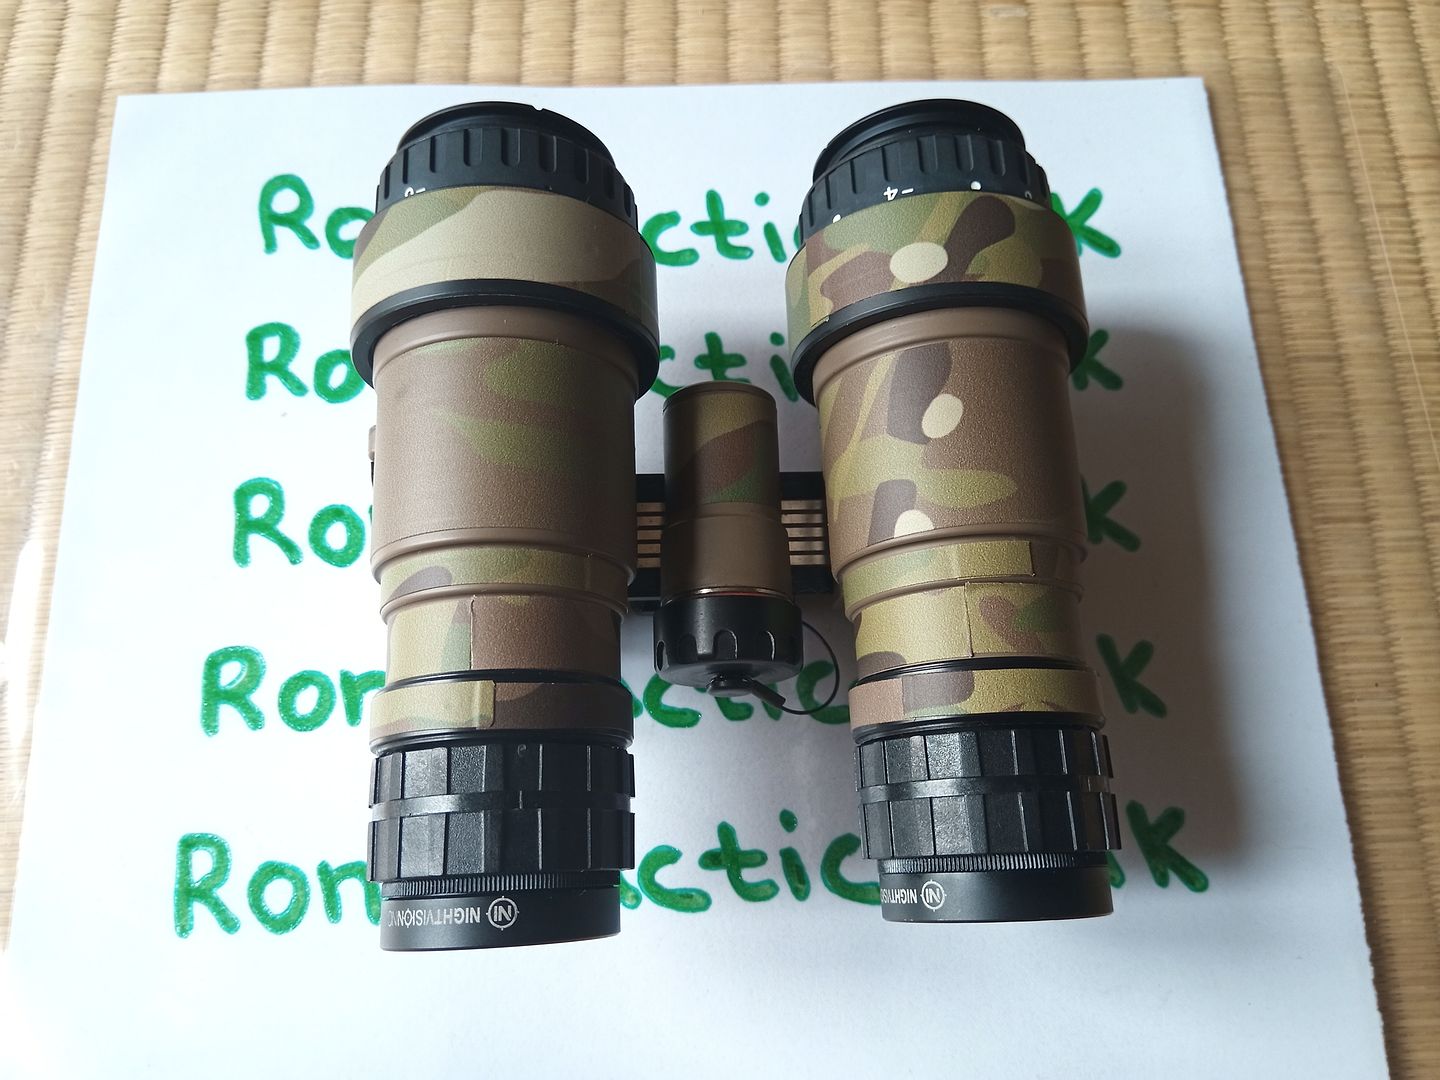 RNVG_Ruggedized_Night_Vision_Goggles_TAN-FDE_with_MULTICAM_Nocorium_RNVG_Wrap_(6)